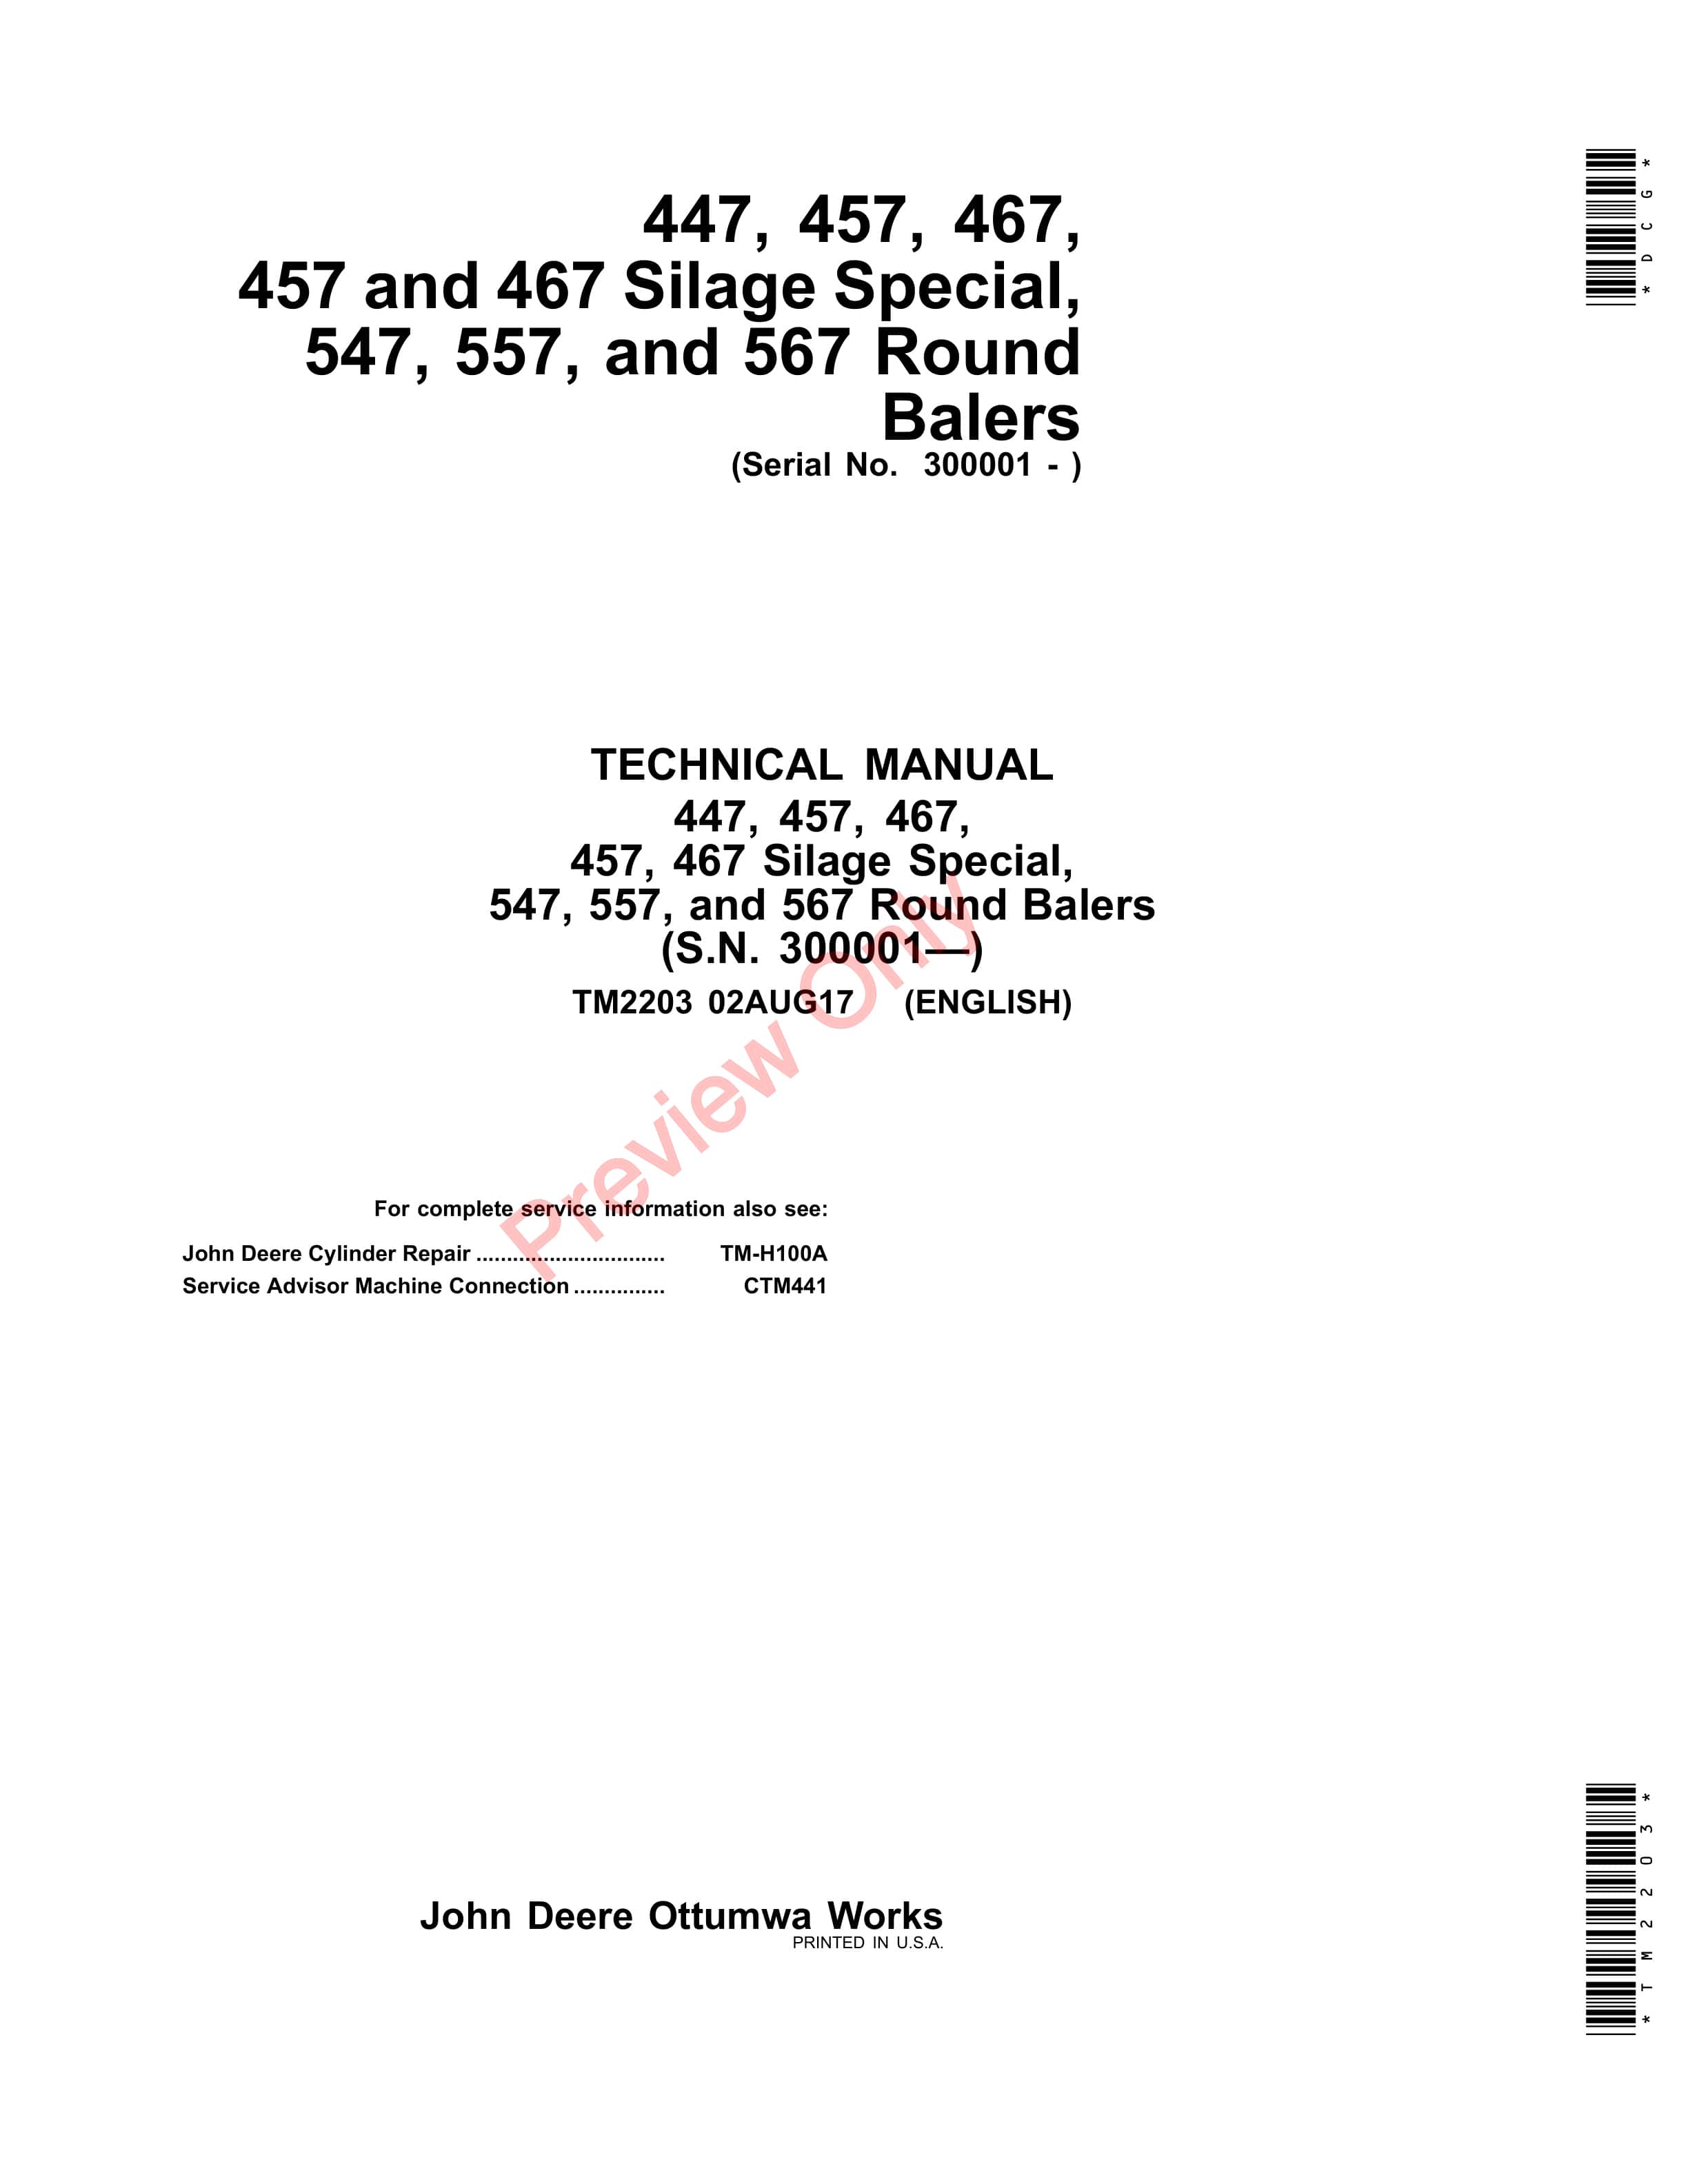 John Deere 447 457 467 457 and 467 Silage Special 547 557 and 567 Round Balers Technical Manual TM2203 02AUG17 PDF